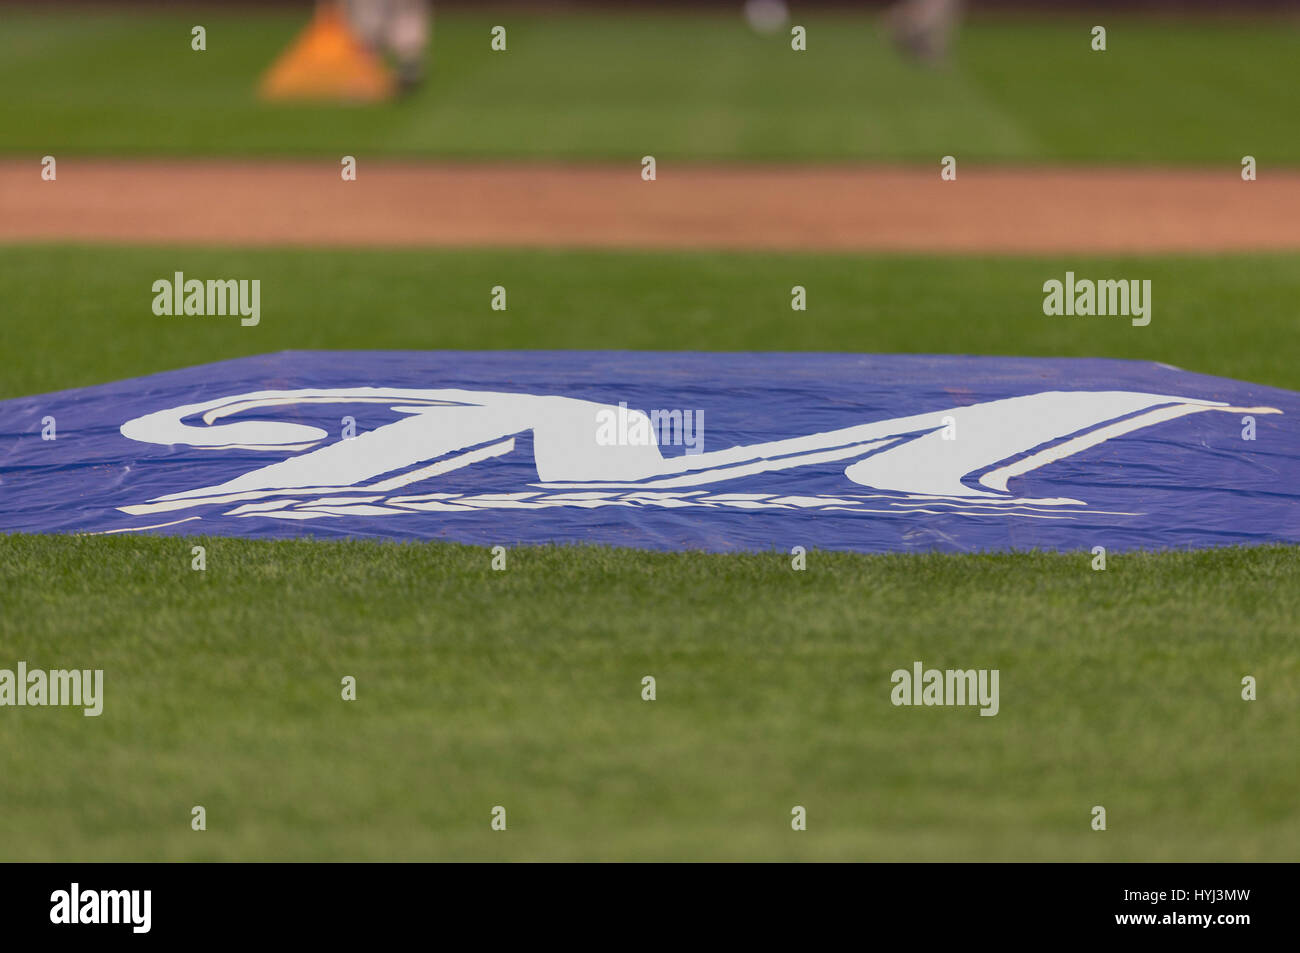 April 03, 2017: The pitching mound covered with the Milwaukee logo prior to the Major League Baseball game between the Milwaukee Brewers and the Colorado Rockies on opening day at Miller Park in Milwaukee, WI. John Fisher/CSM Stock Photo